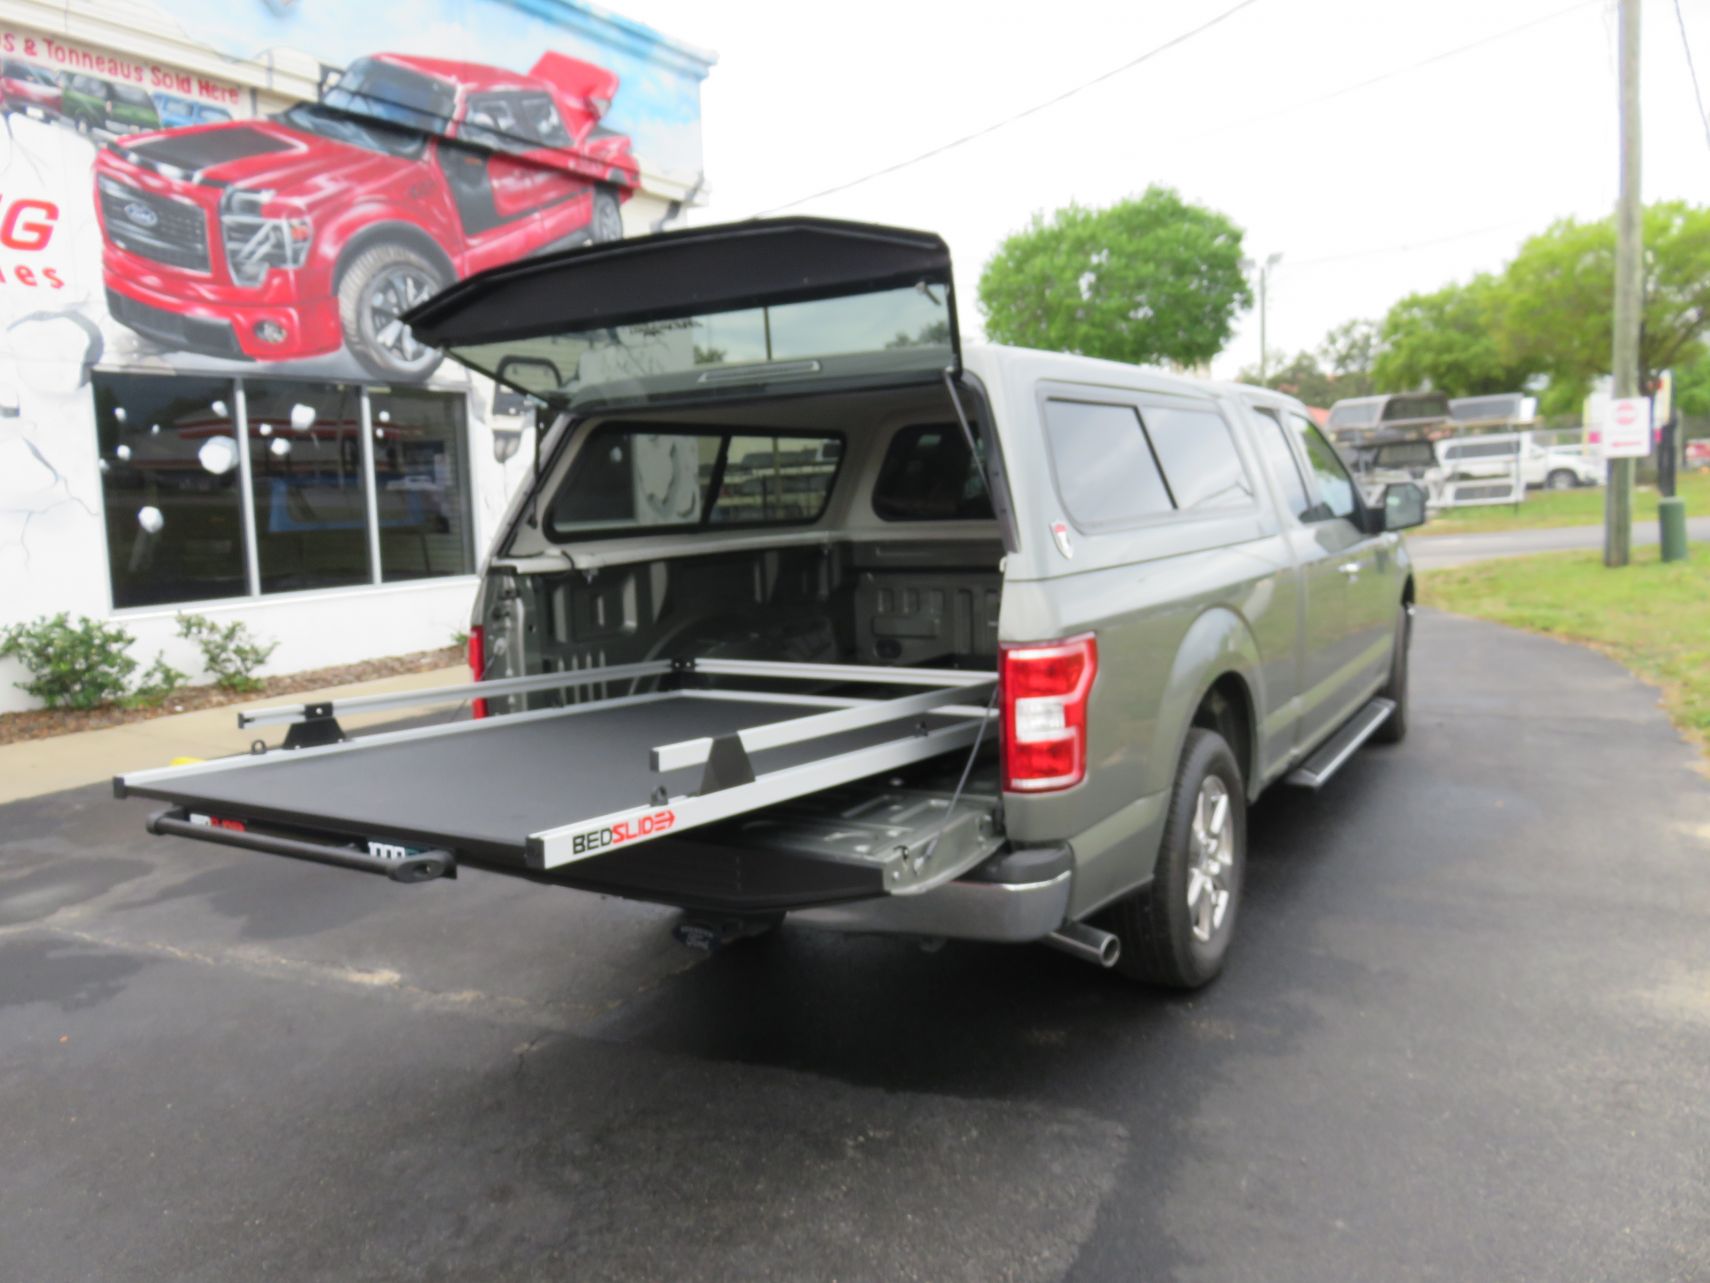 2019 Ford F150 with TK Defender Fiberglass Topper, Bedslide, Running Boards, Tint, Hitch. Call TopperKING Brandon 813-689-2449 or Clearwater FL 727-530-9066